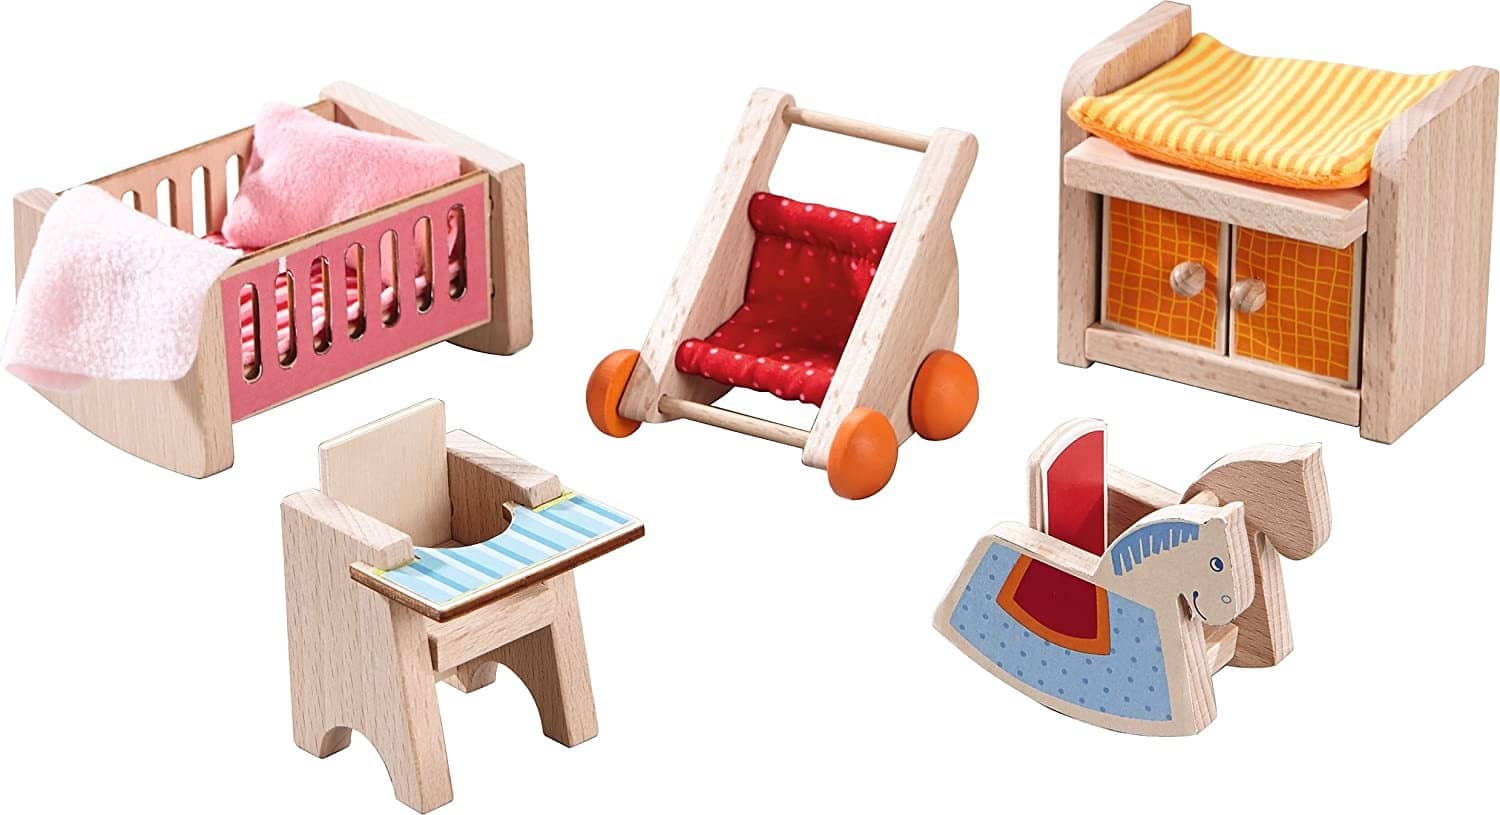 HABA Little Friends – Dollhouse Accessories Set of 4 Rugs – BRAND